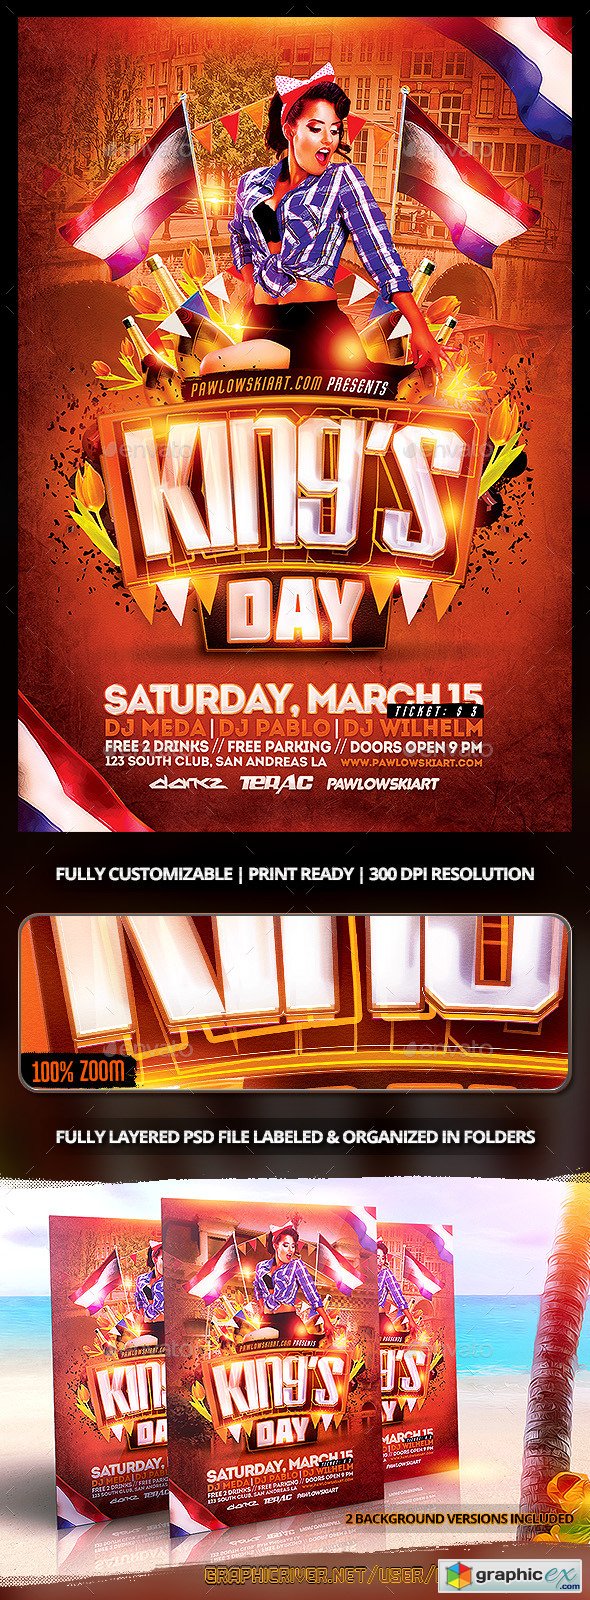 King's Day / KoningsDag Party Flyer Template